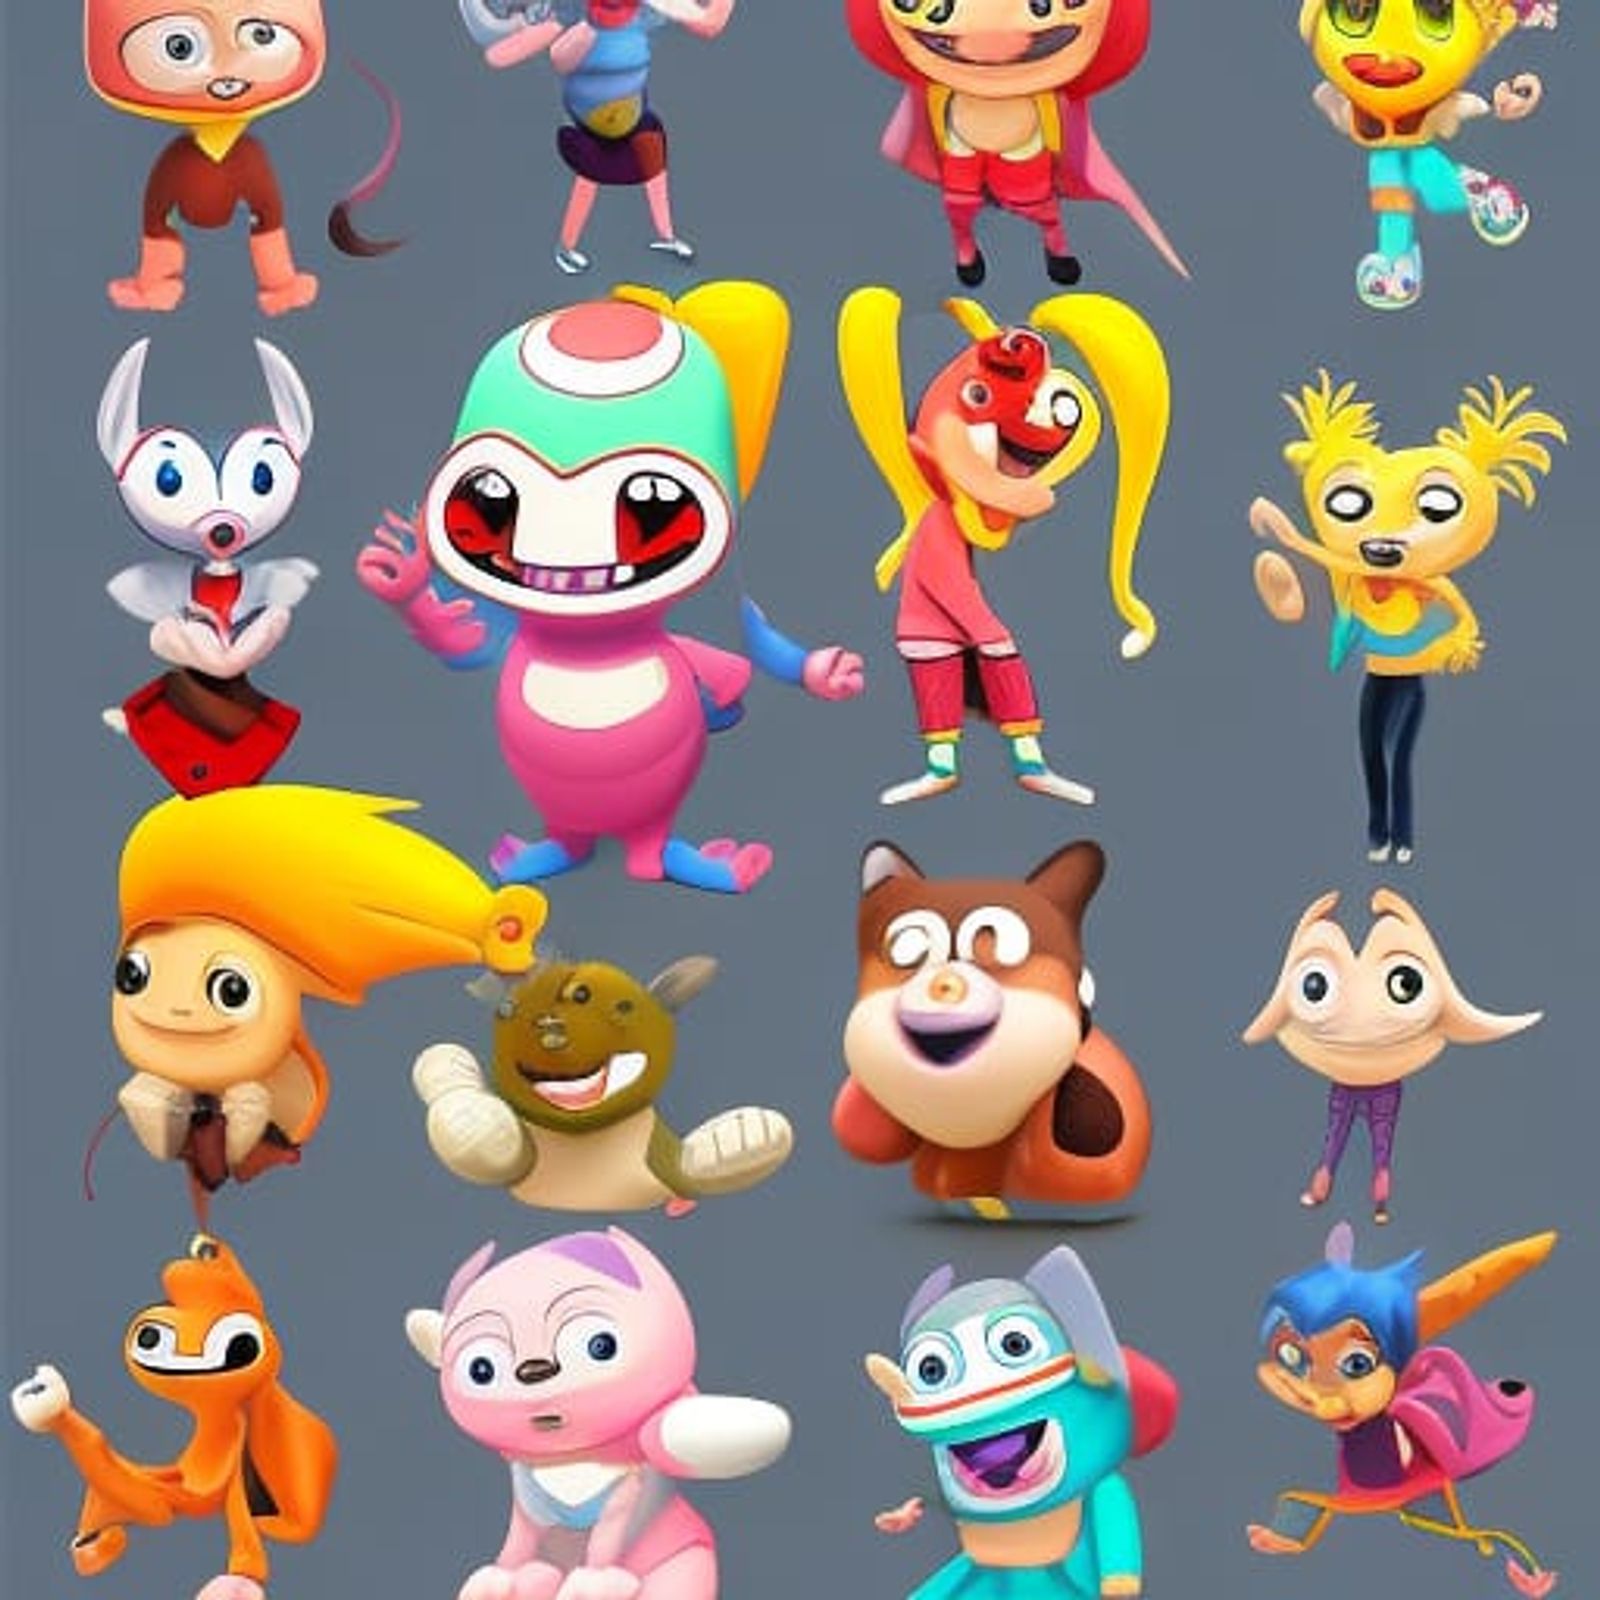 cartoon characters pictures and names